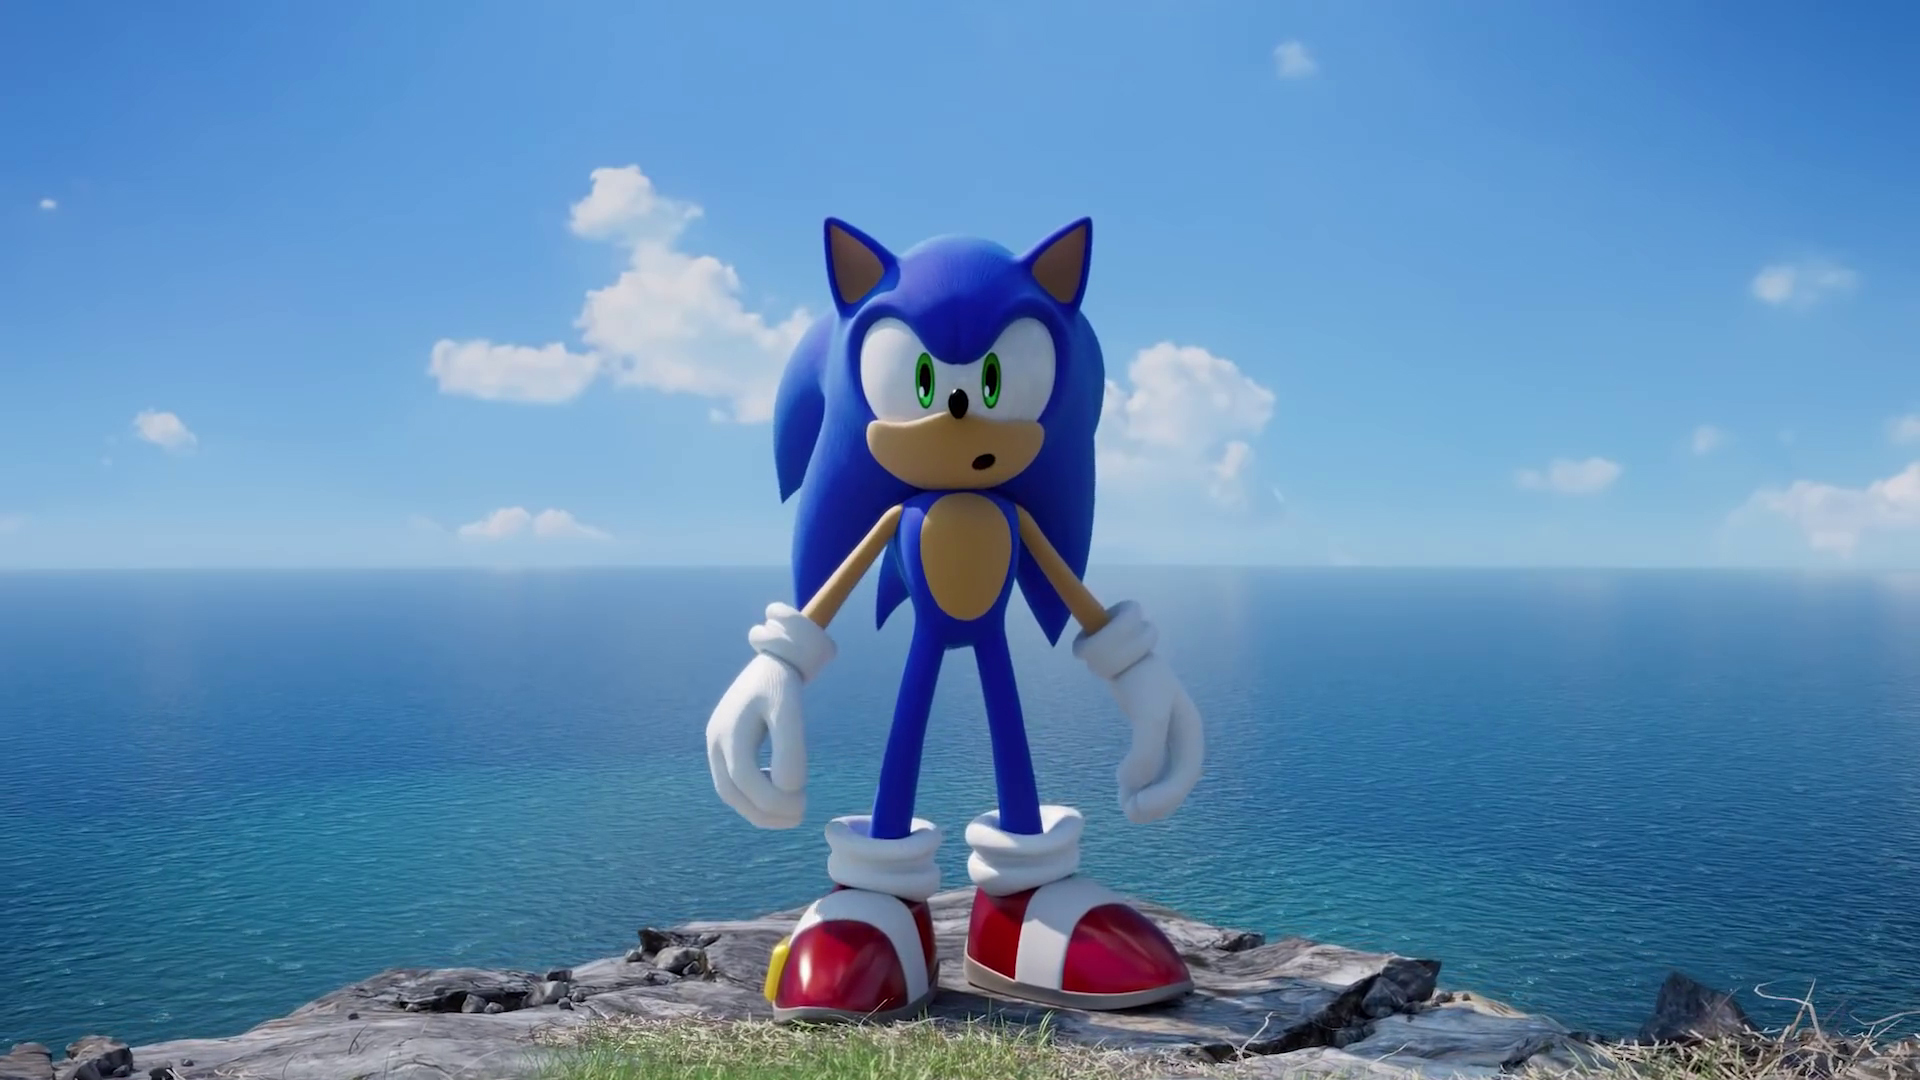 Sonic standing gobsmacked at the edge of a cliff